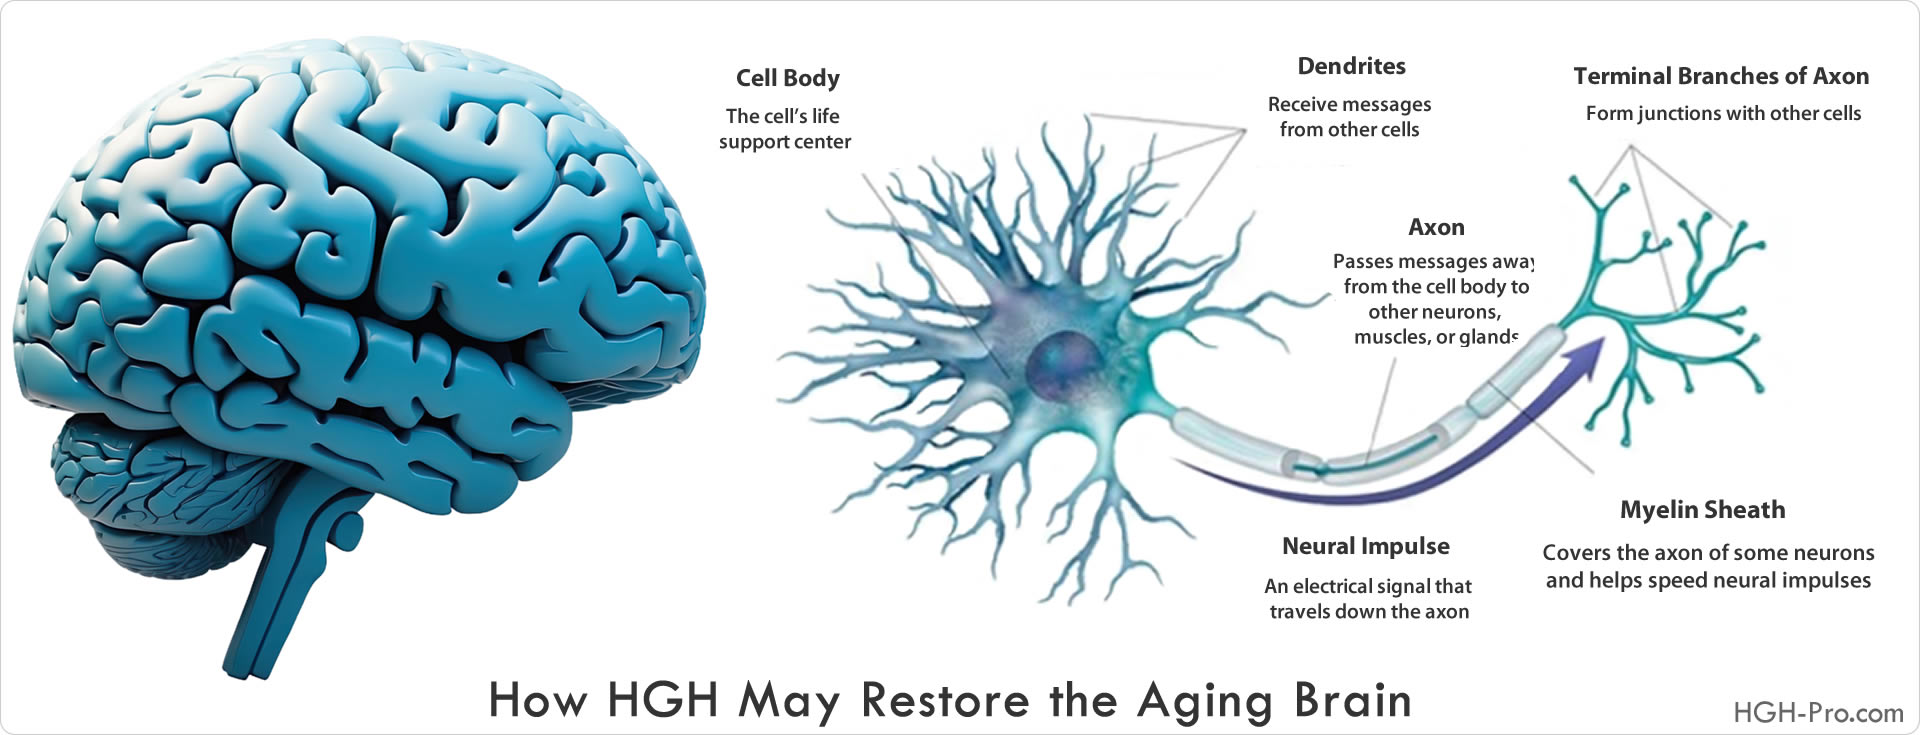 HGH and the Aging Brain